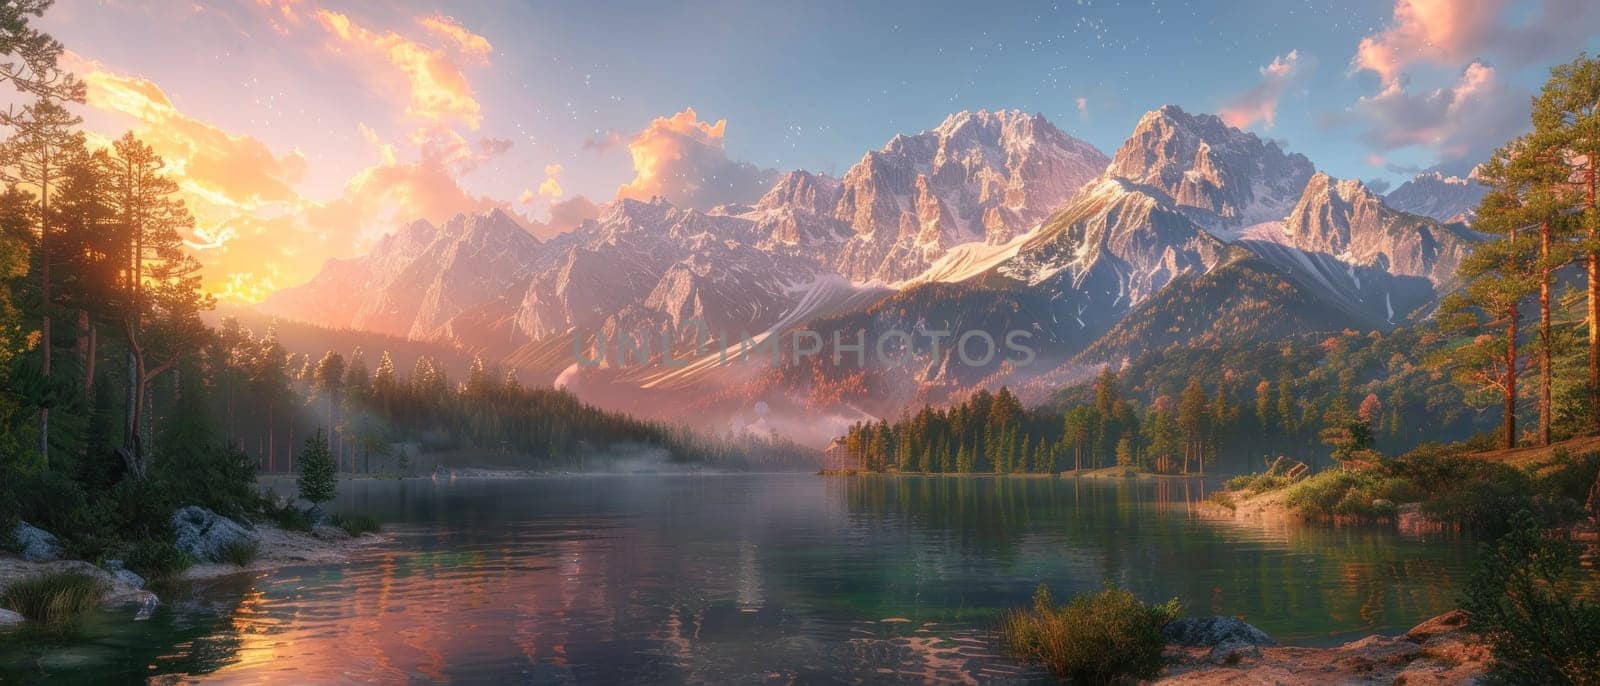 A beautiful mountain range with a lake in the foreground.